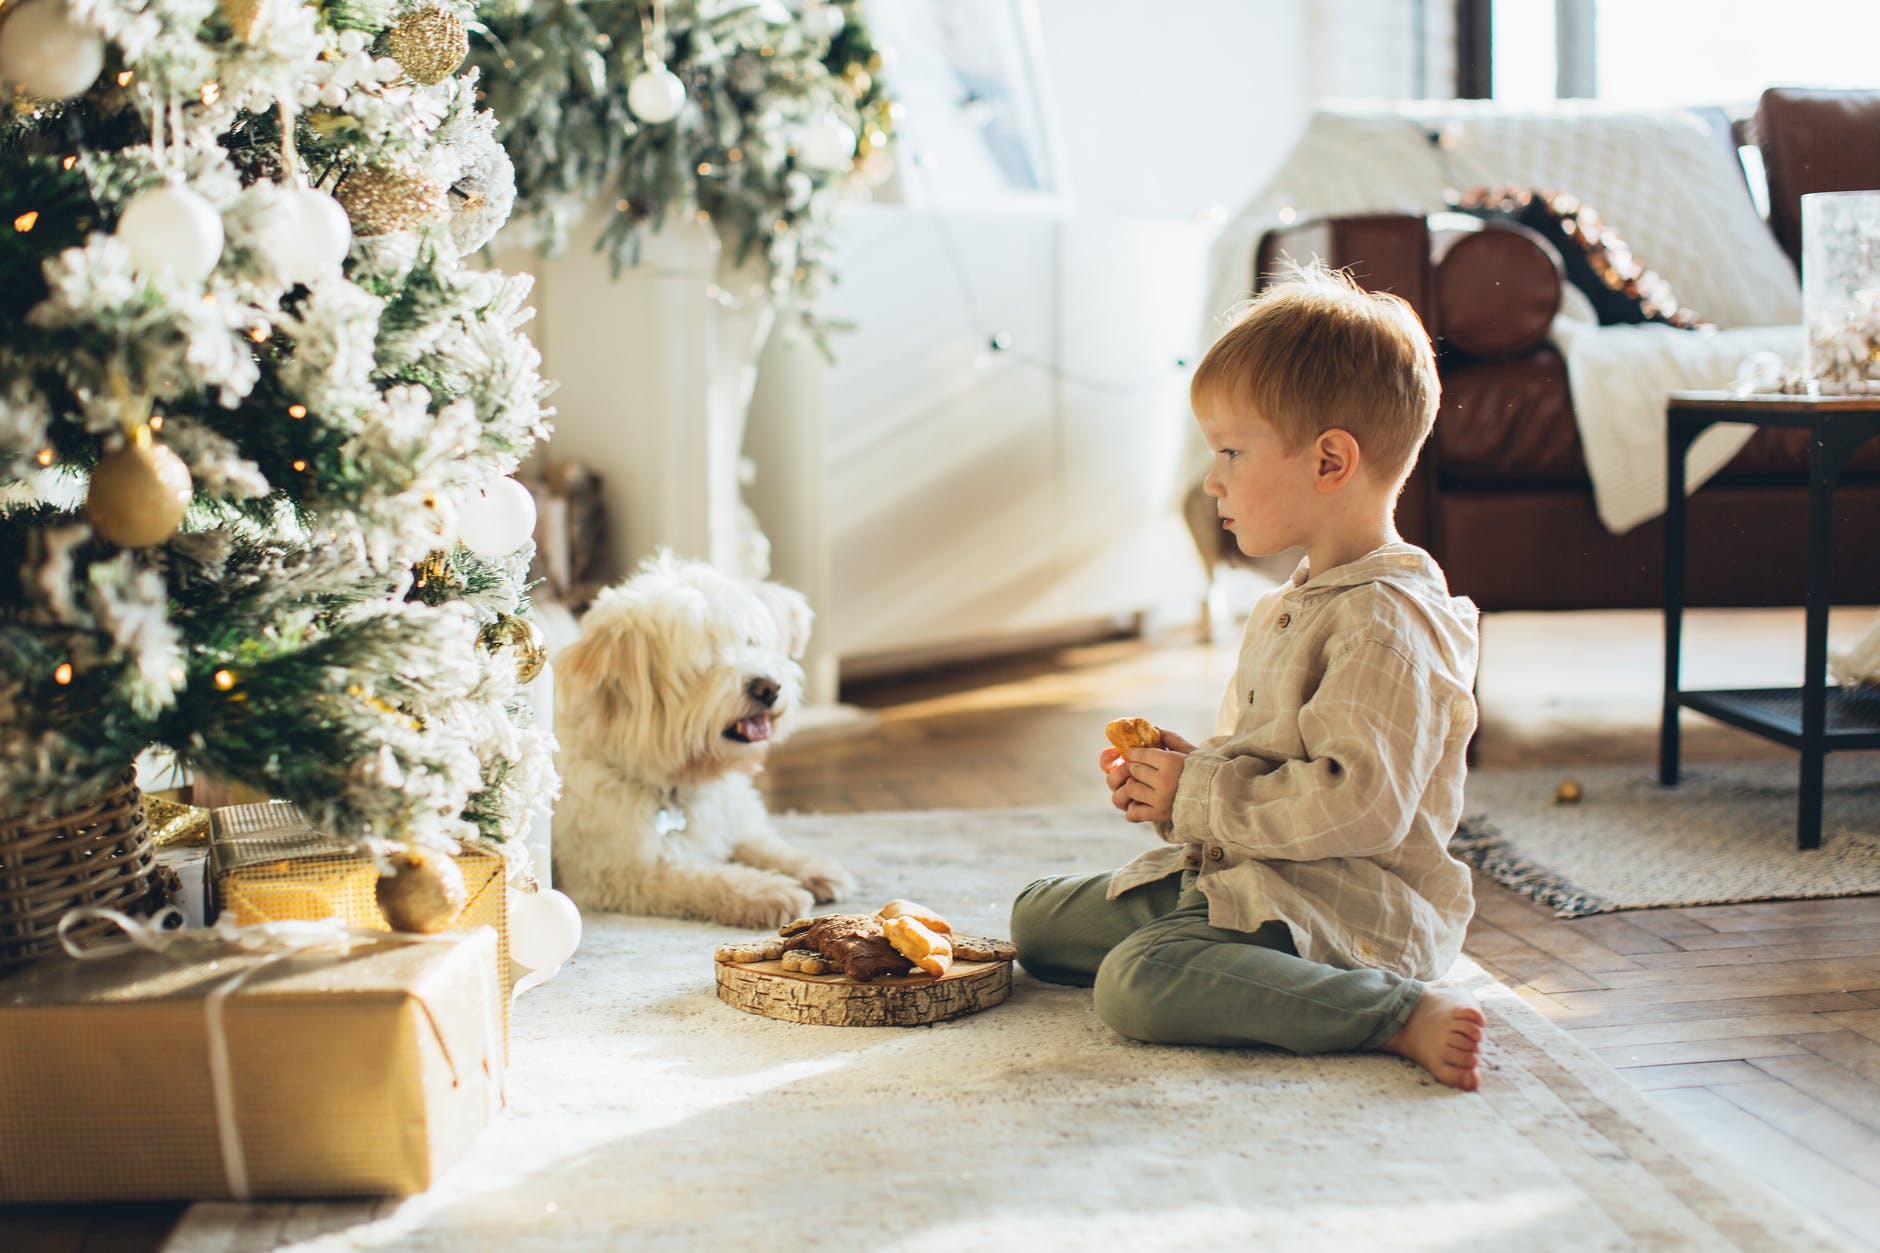 Henry told him that Santa got robbed, and Tommy calmed down.| Source: Pexels